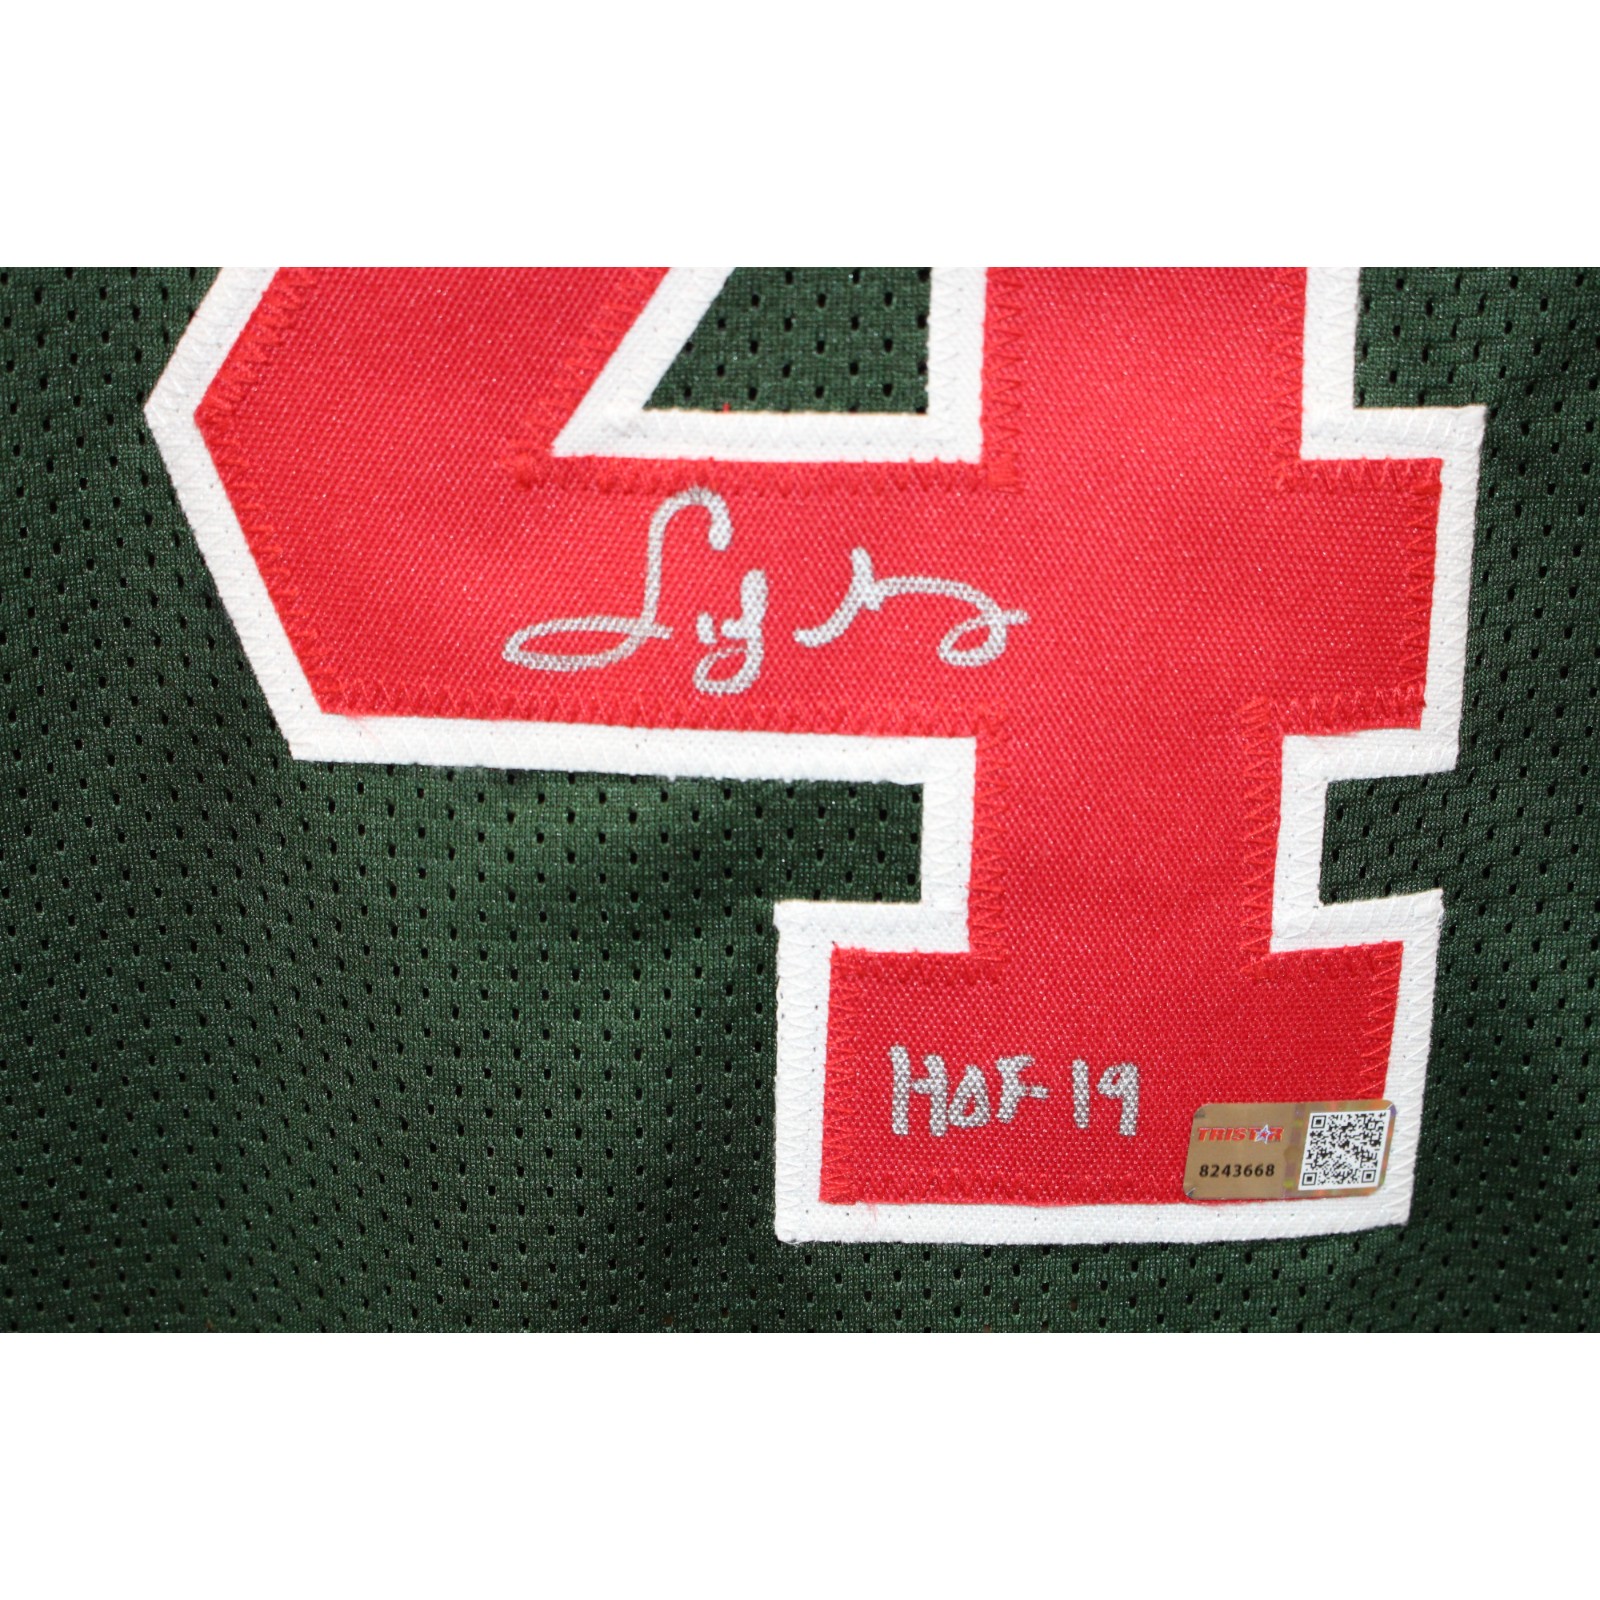 Sydney Moncrief Autographed/Signed Pro Style Green Jersey HOF Beckett